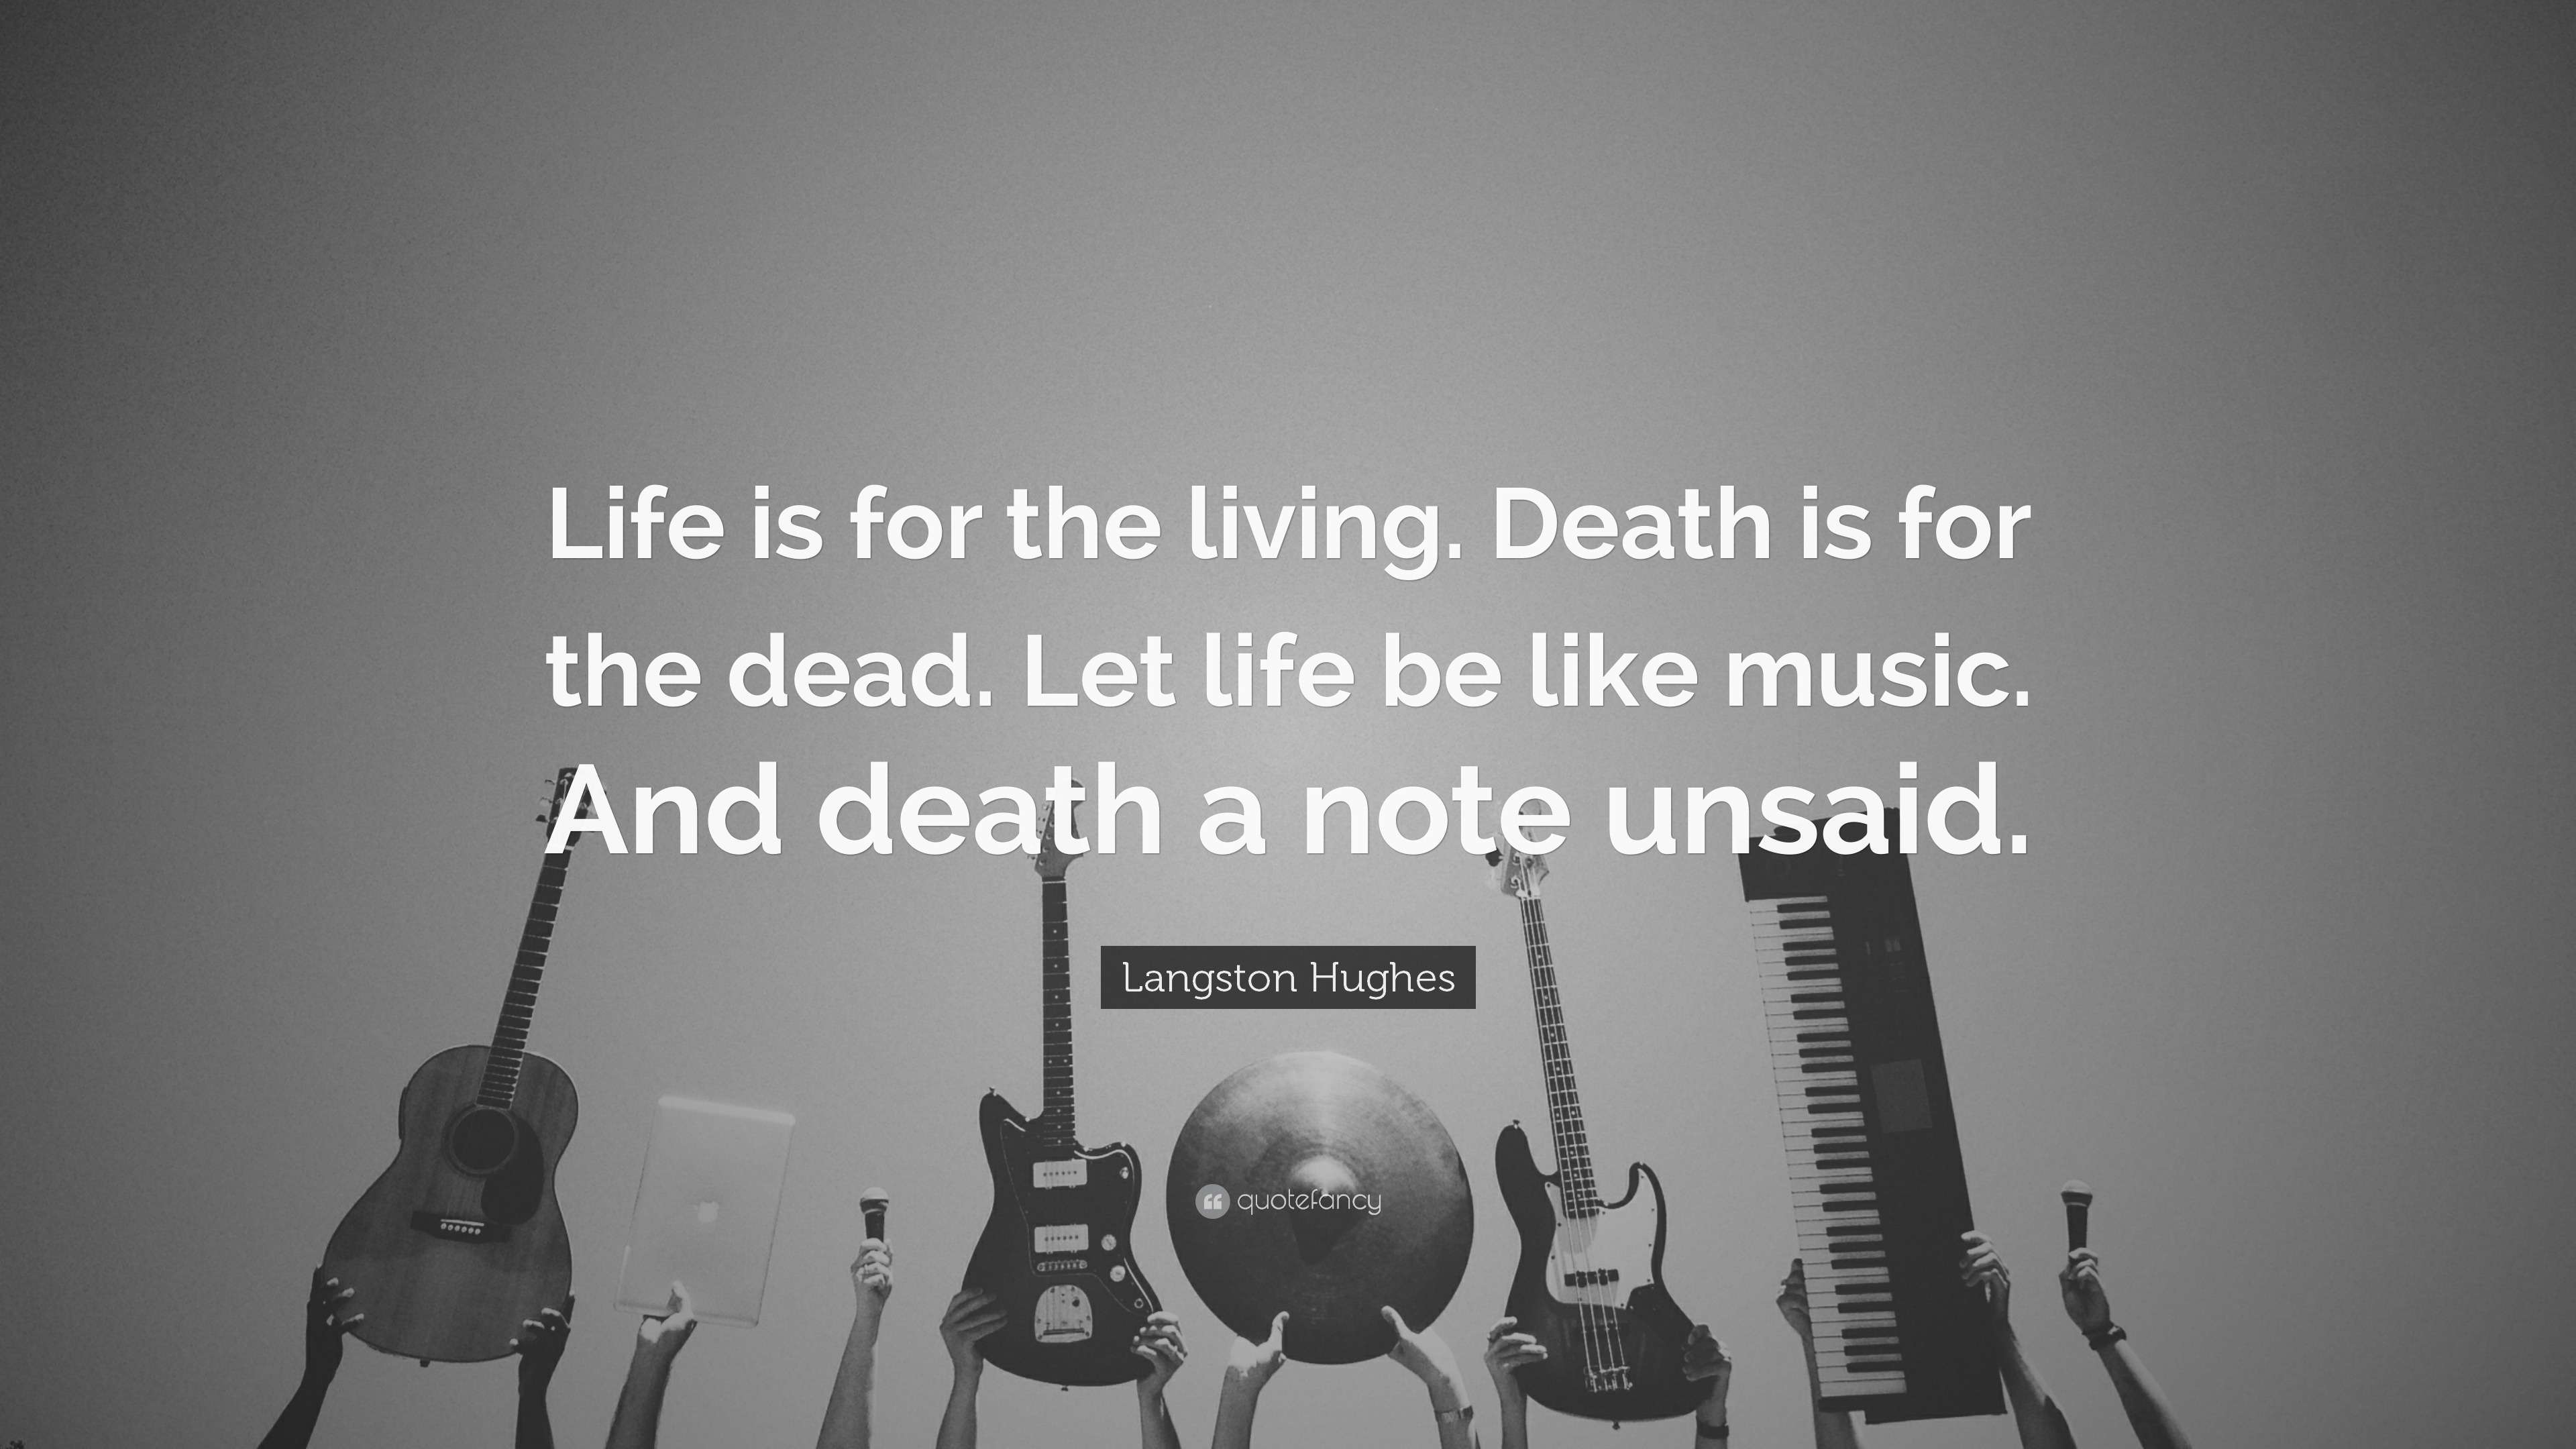 life is like music quotes Famous life is like music quotes Popular life is like music quotes